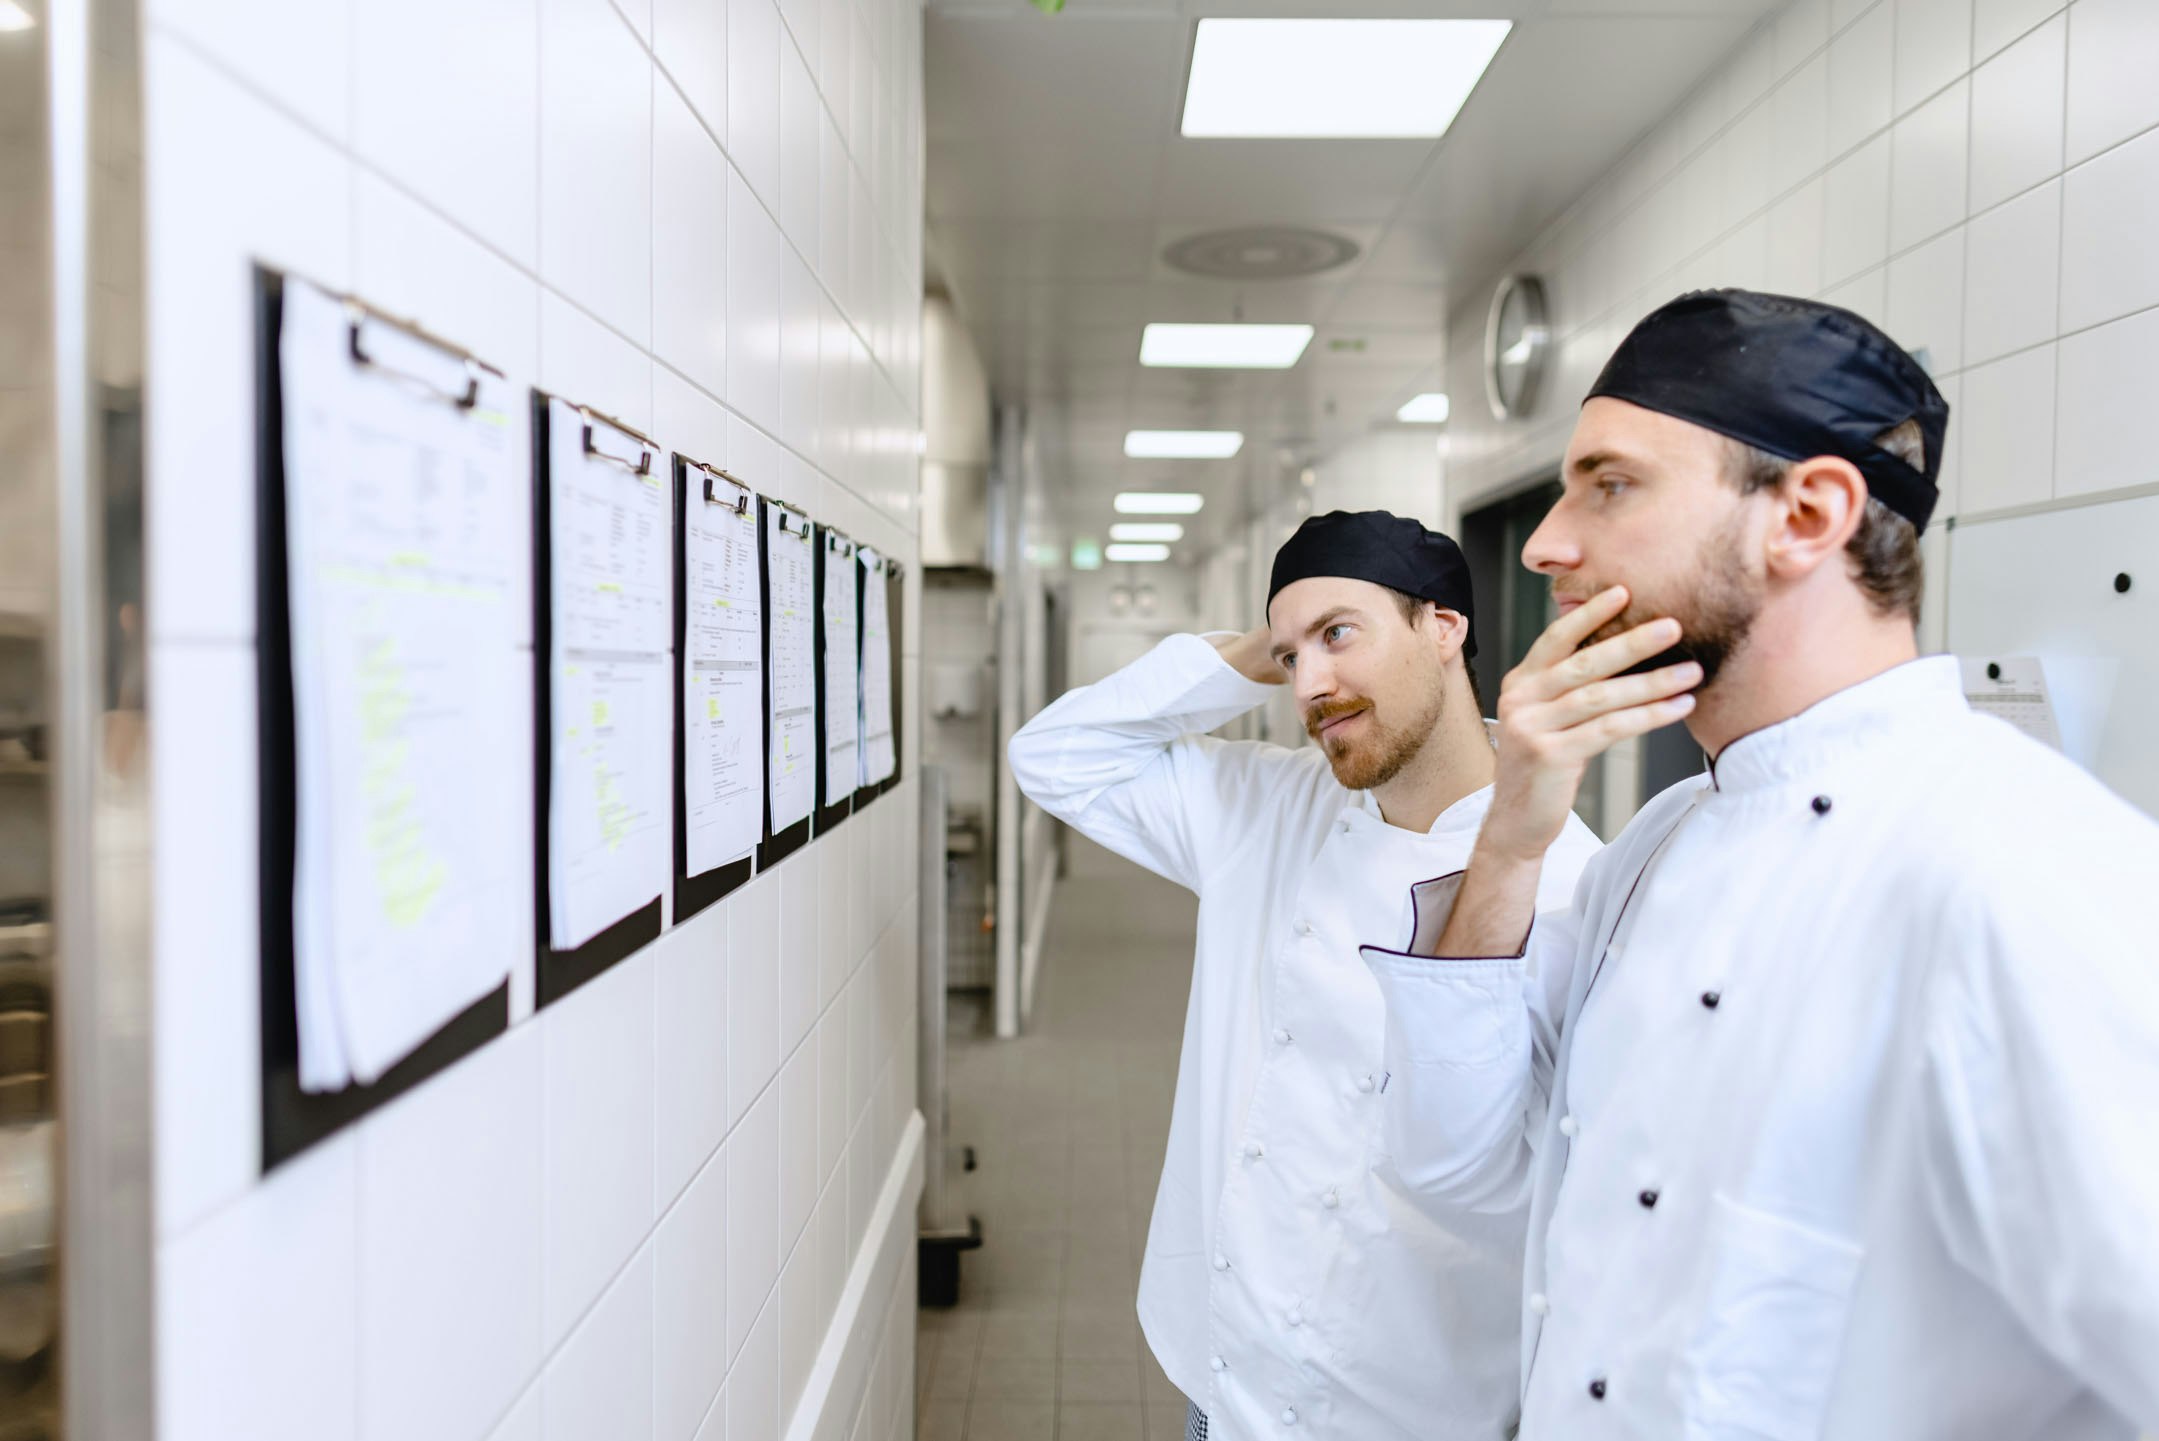 Two chefs are looking at the menu in the kitchen